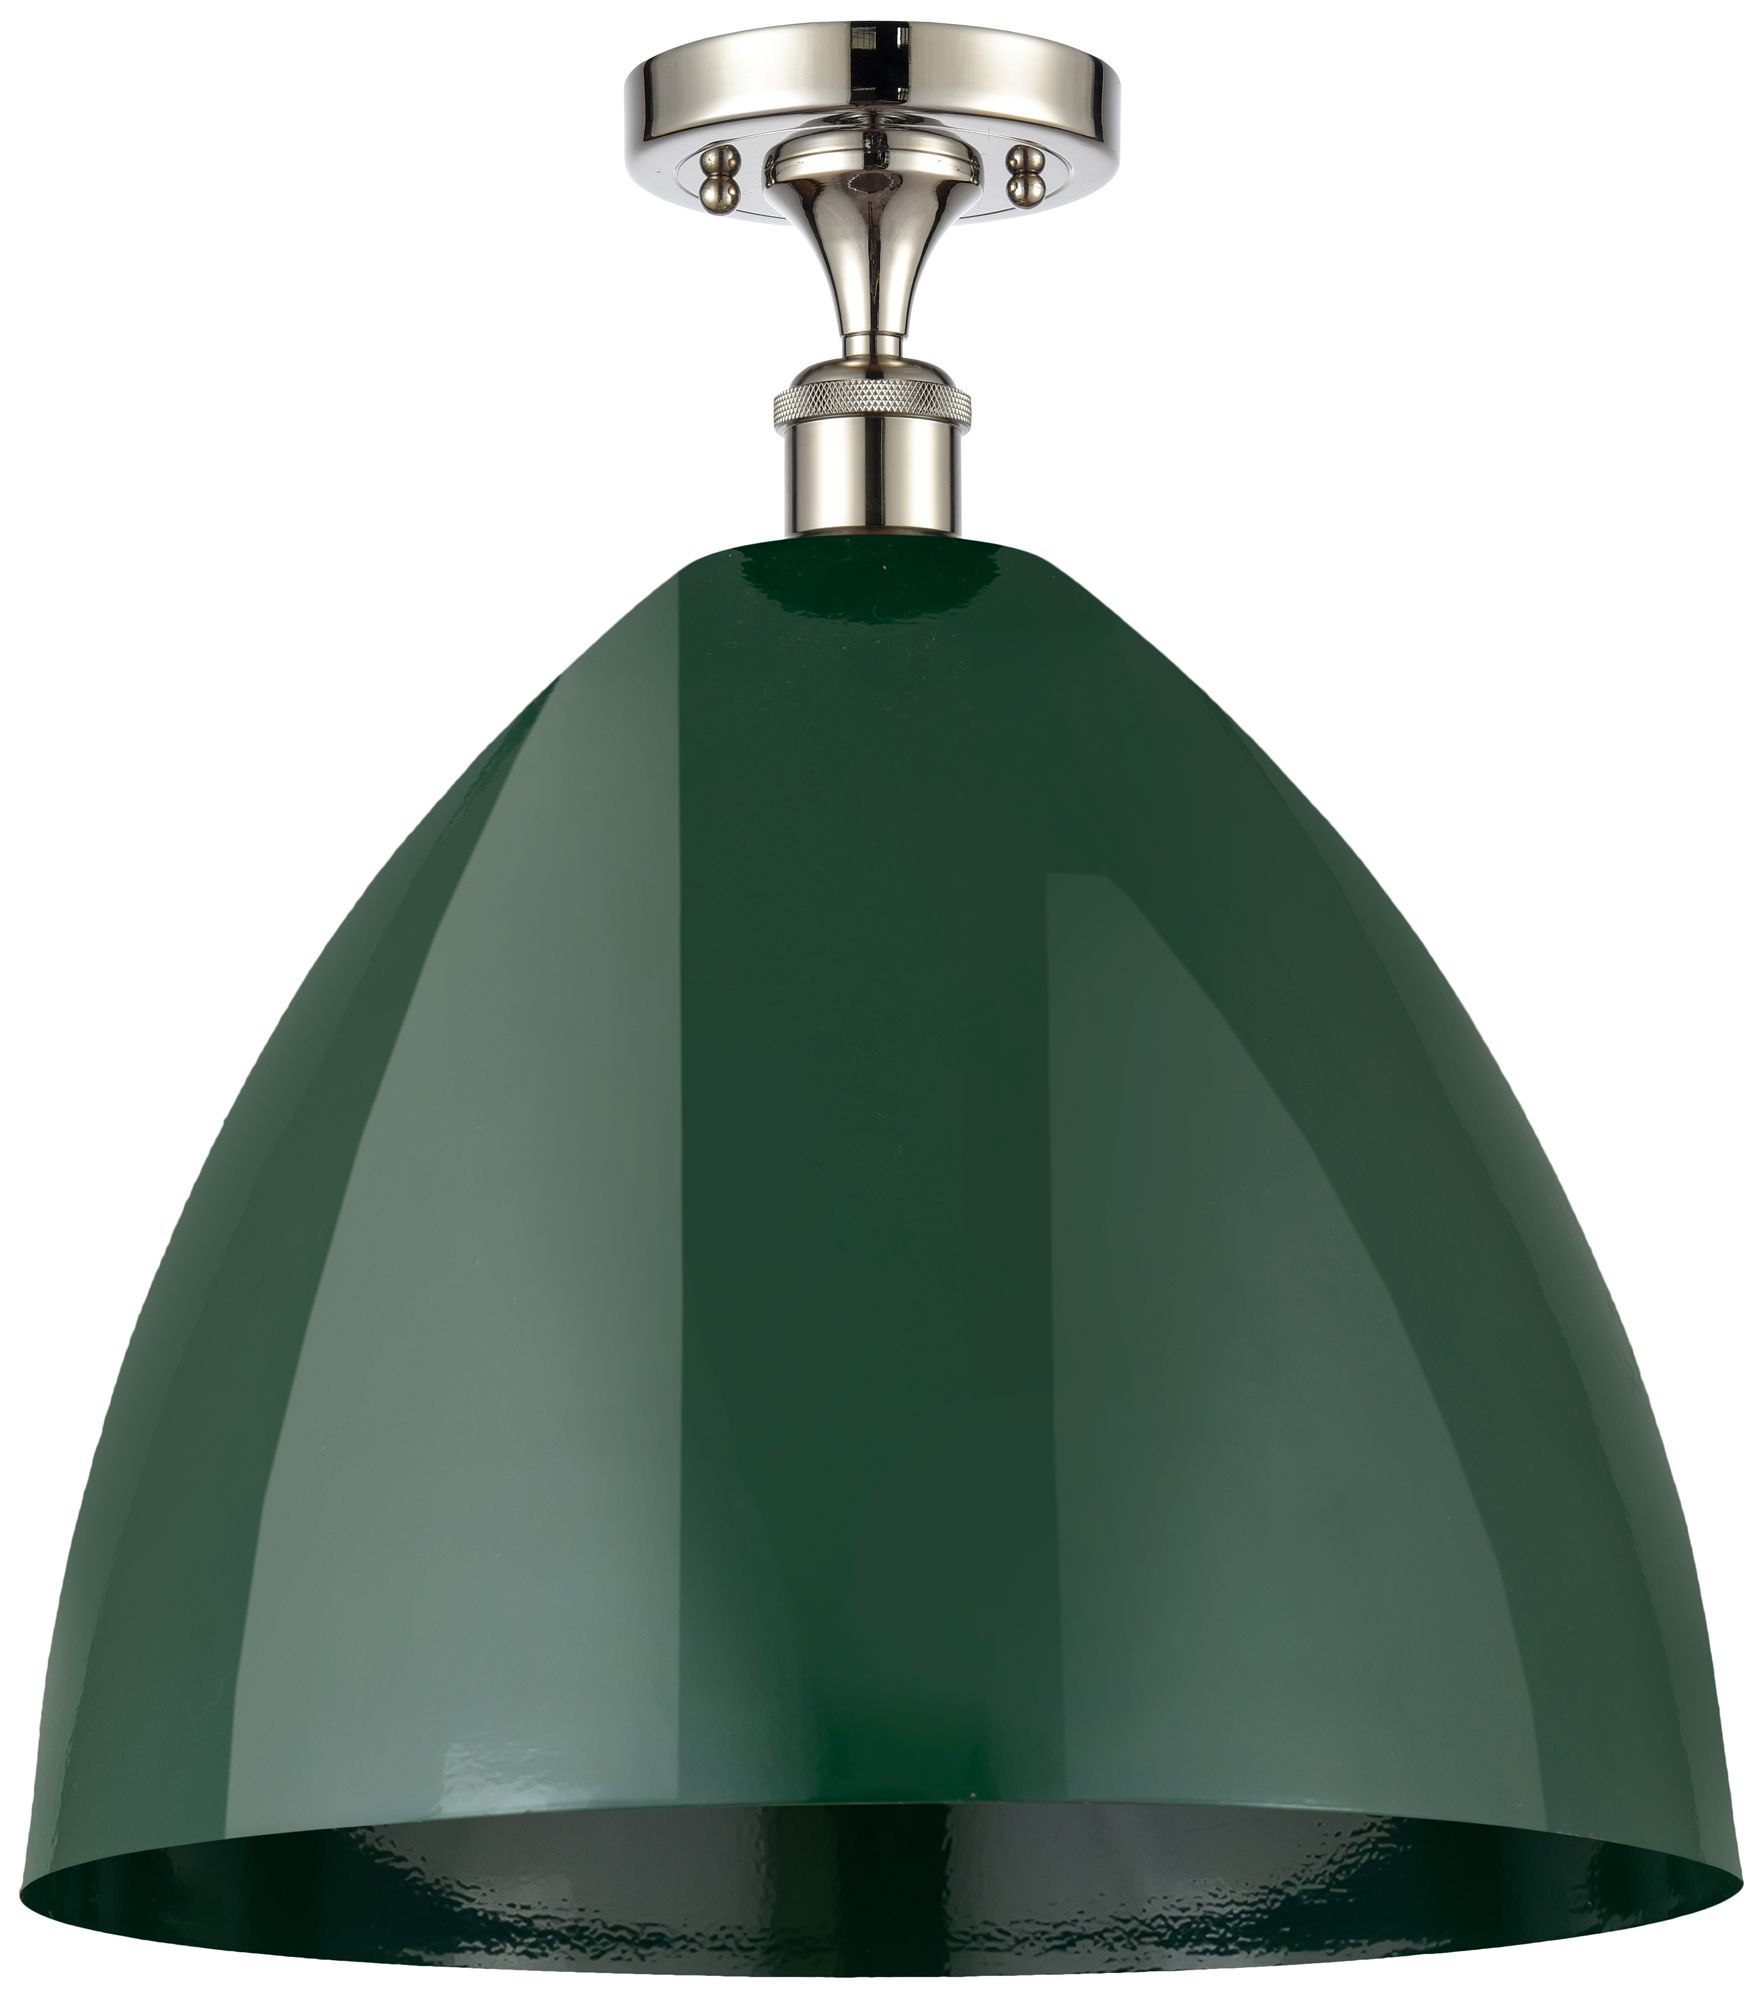 Plymouth Dome 16" Wide Polished Nickel Semi Flush Mount w/ Green Shade